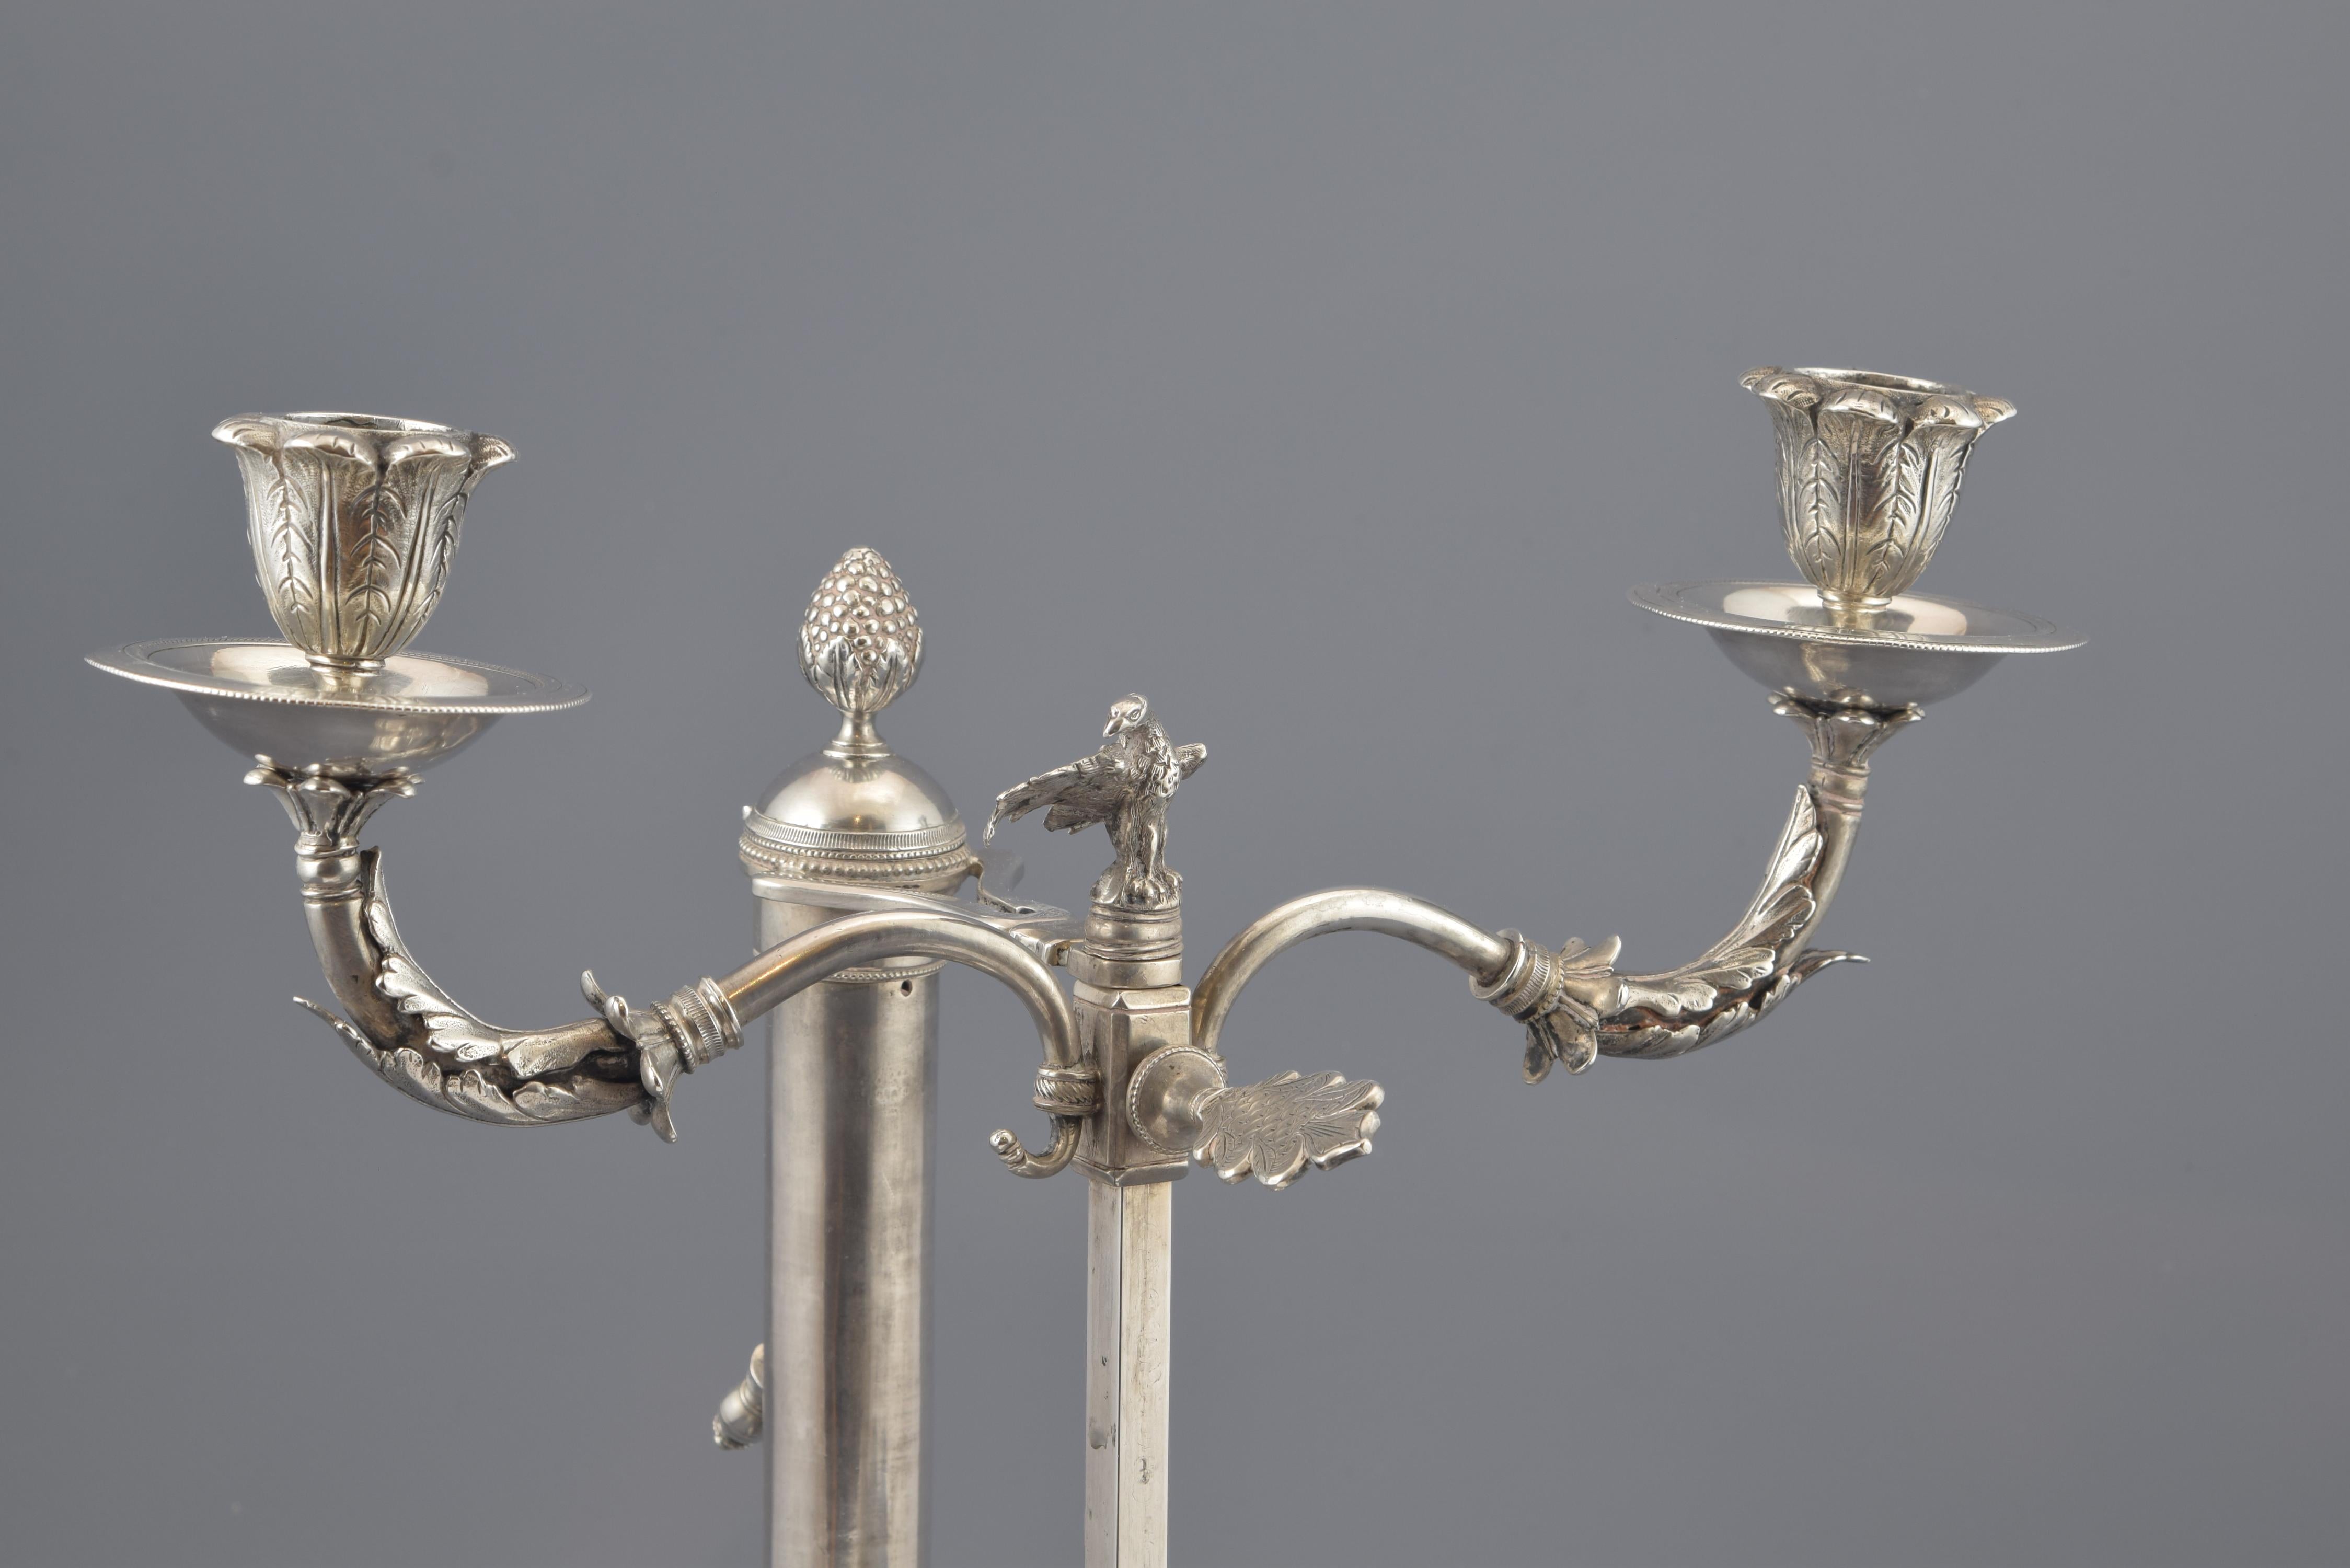 Solid Silver Lamp, with Hallmarks, Possibly Malaga, Spain, 19th Century For Sale 5